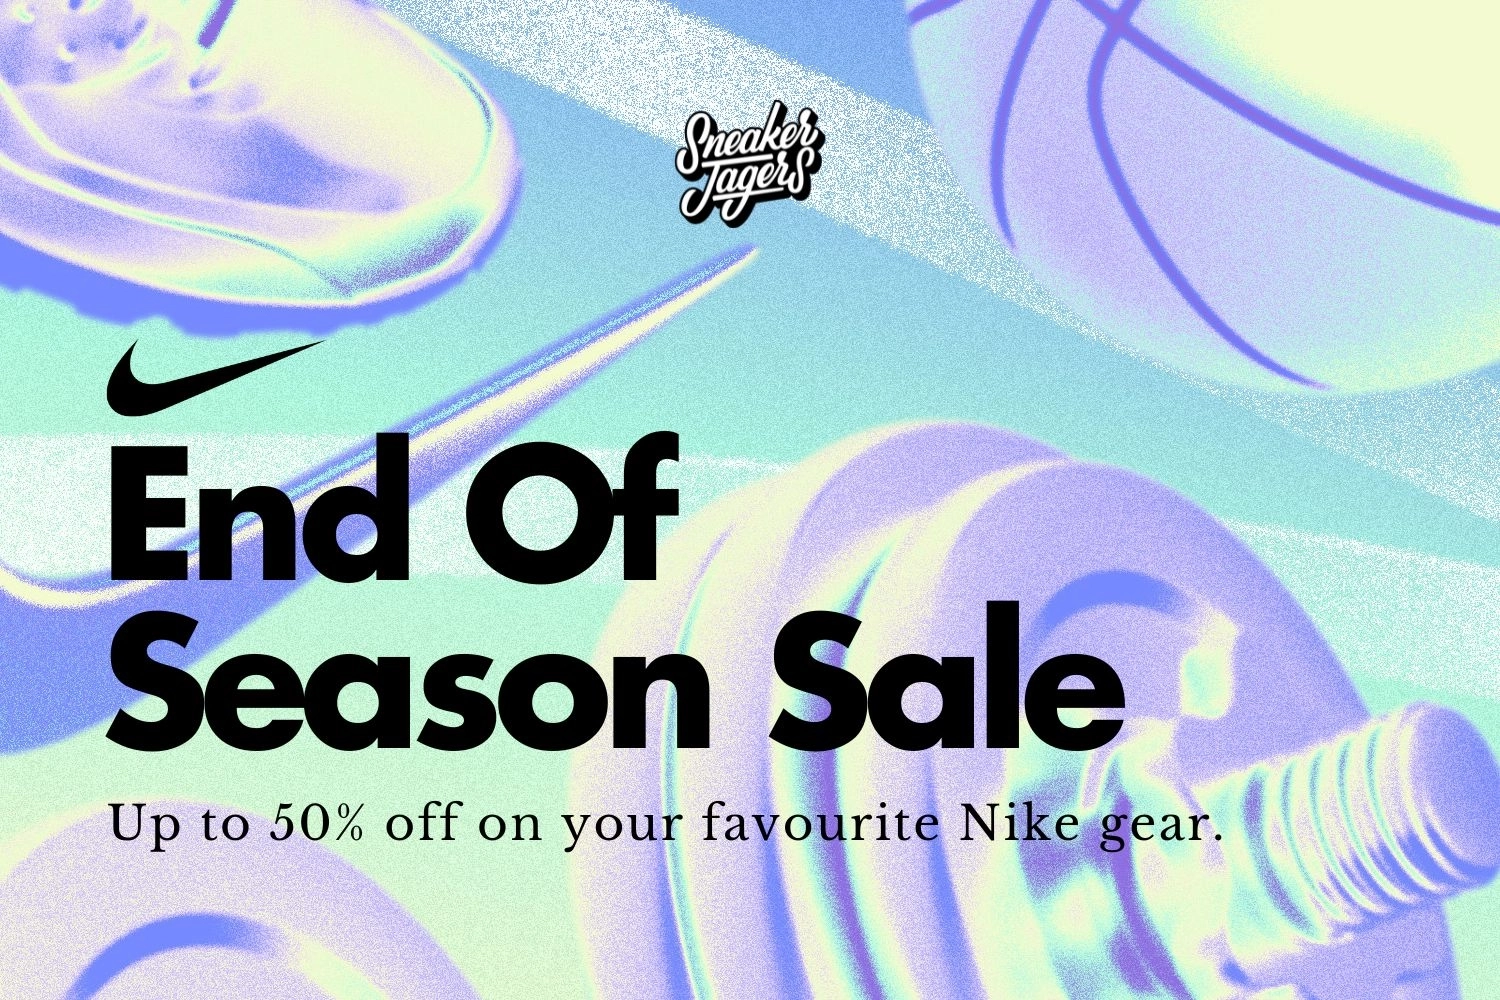 Don't miss out on the Nike End of Season Sale